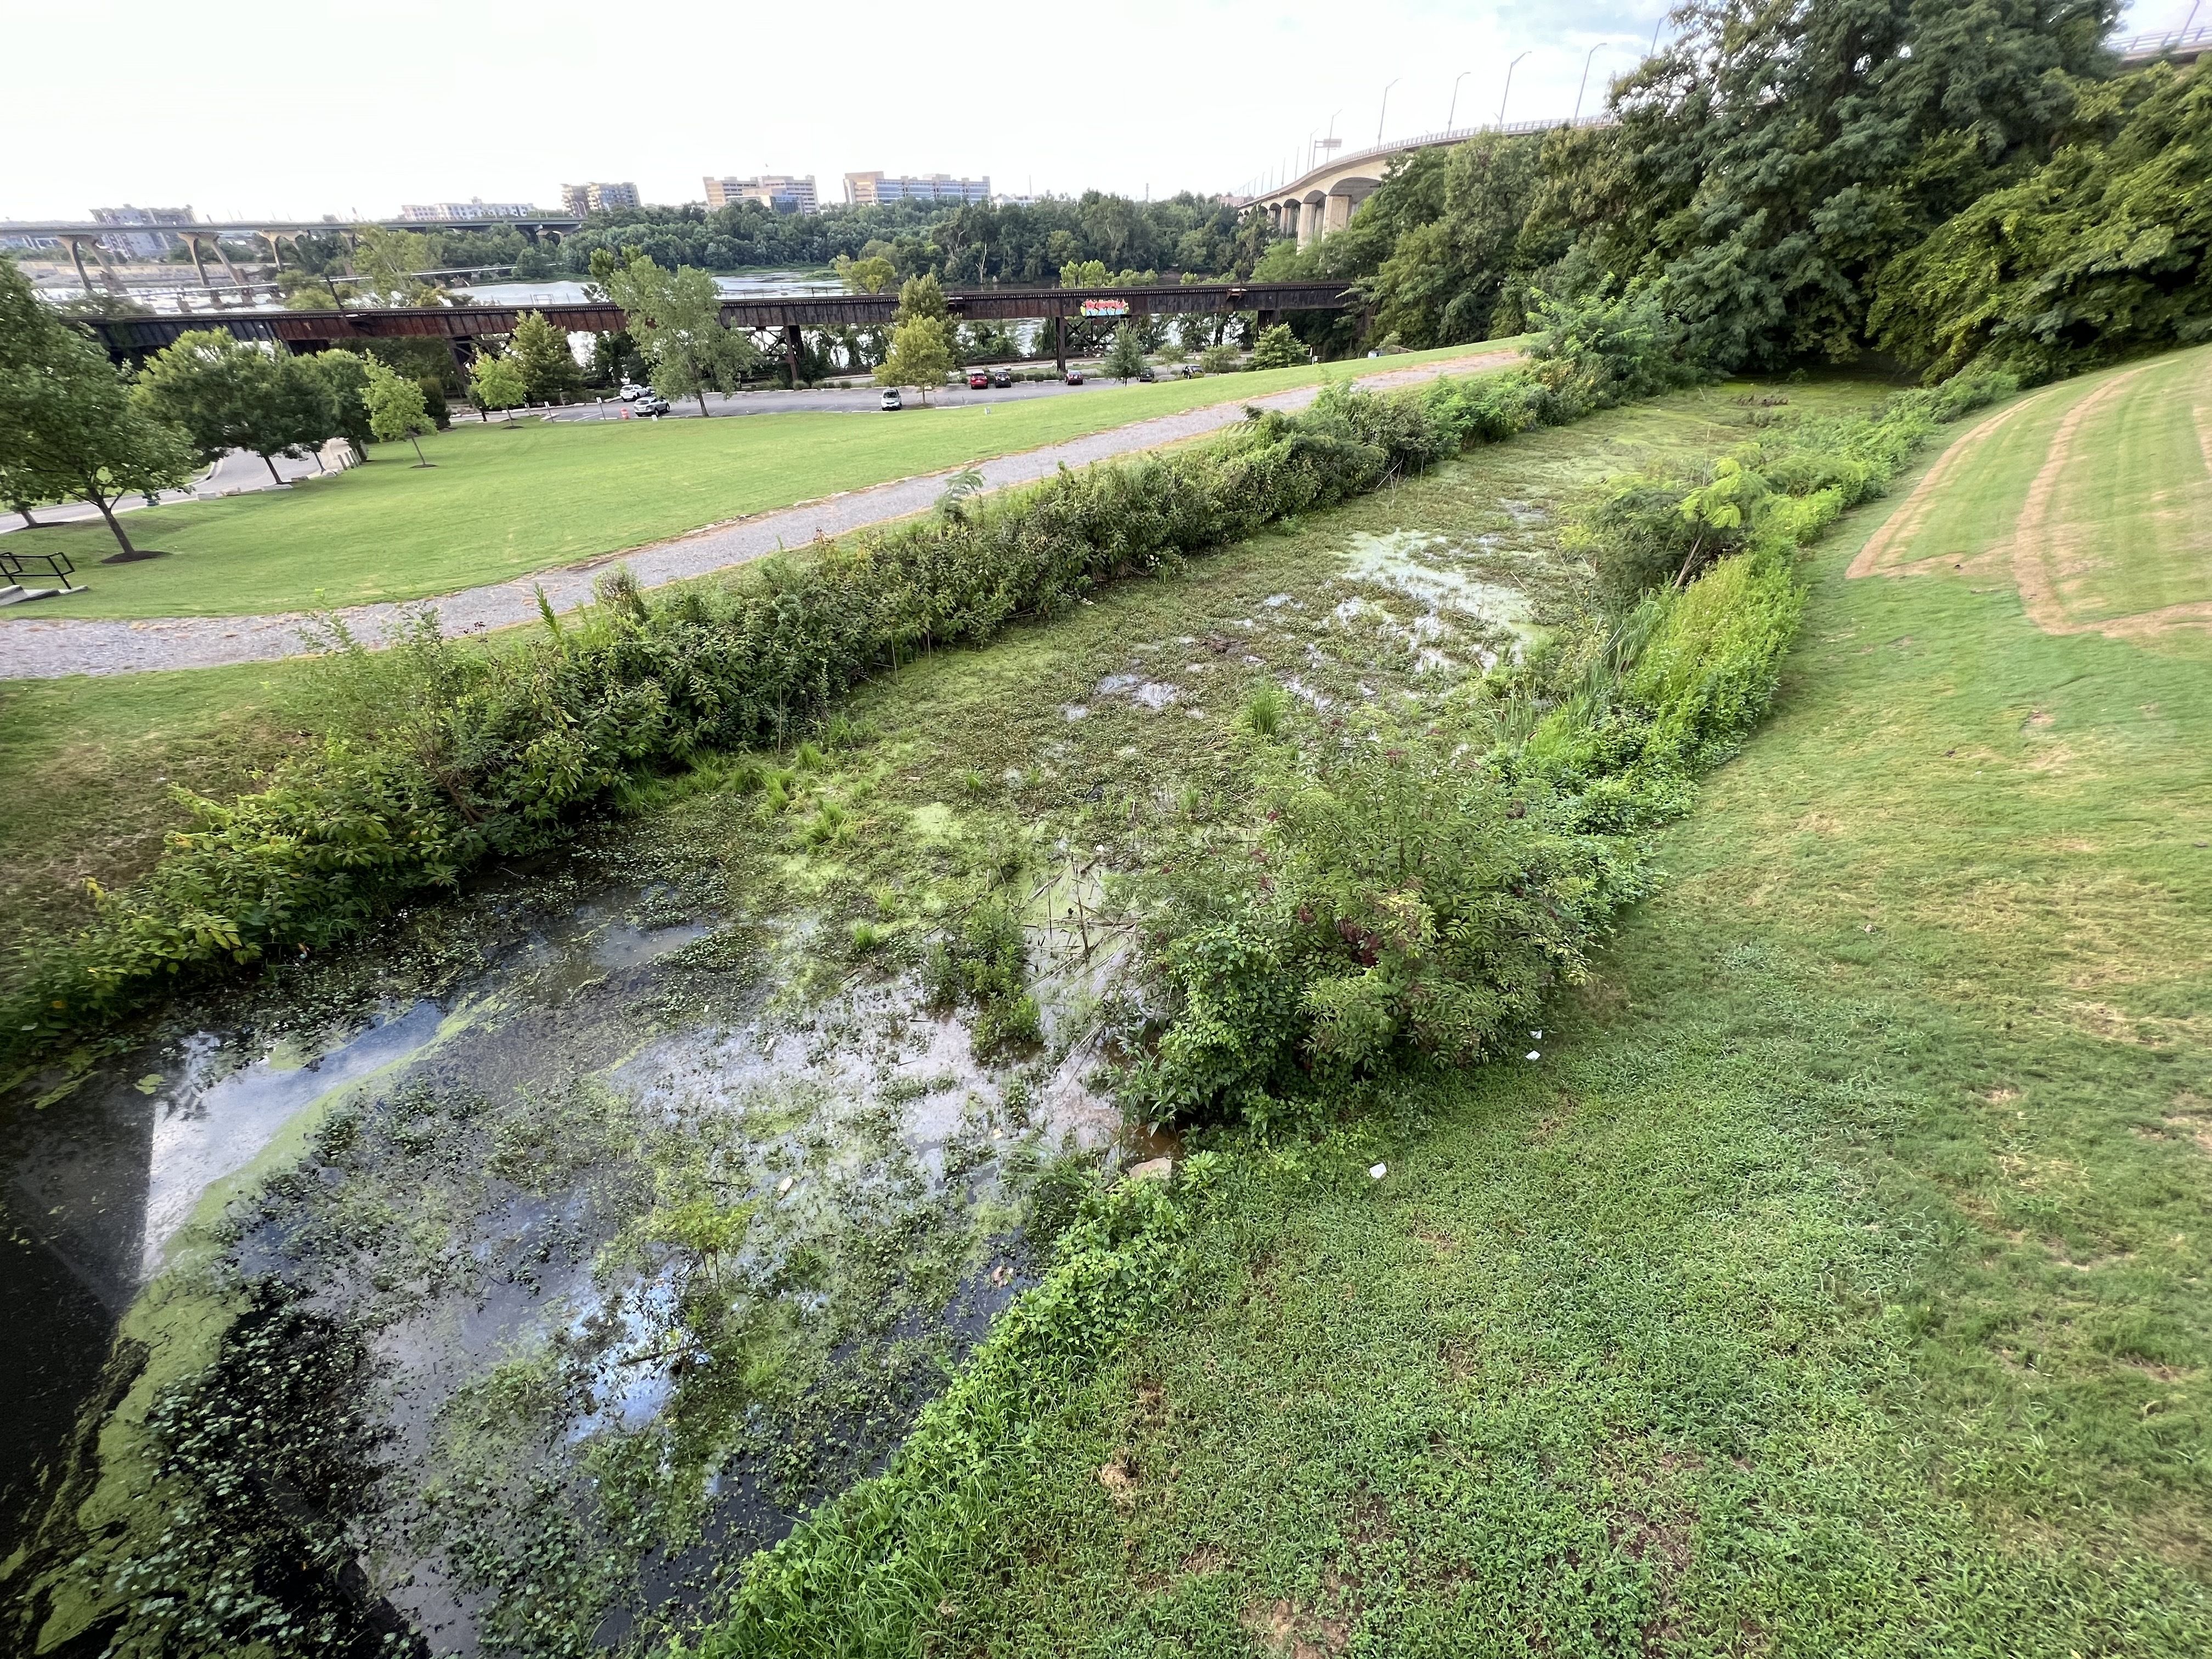 A photo of a canal bed mostly empty of water and filled with weeds.